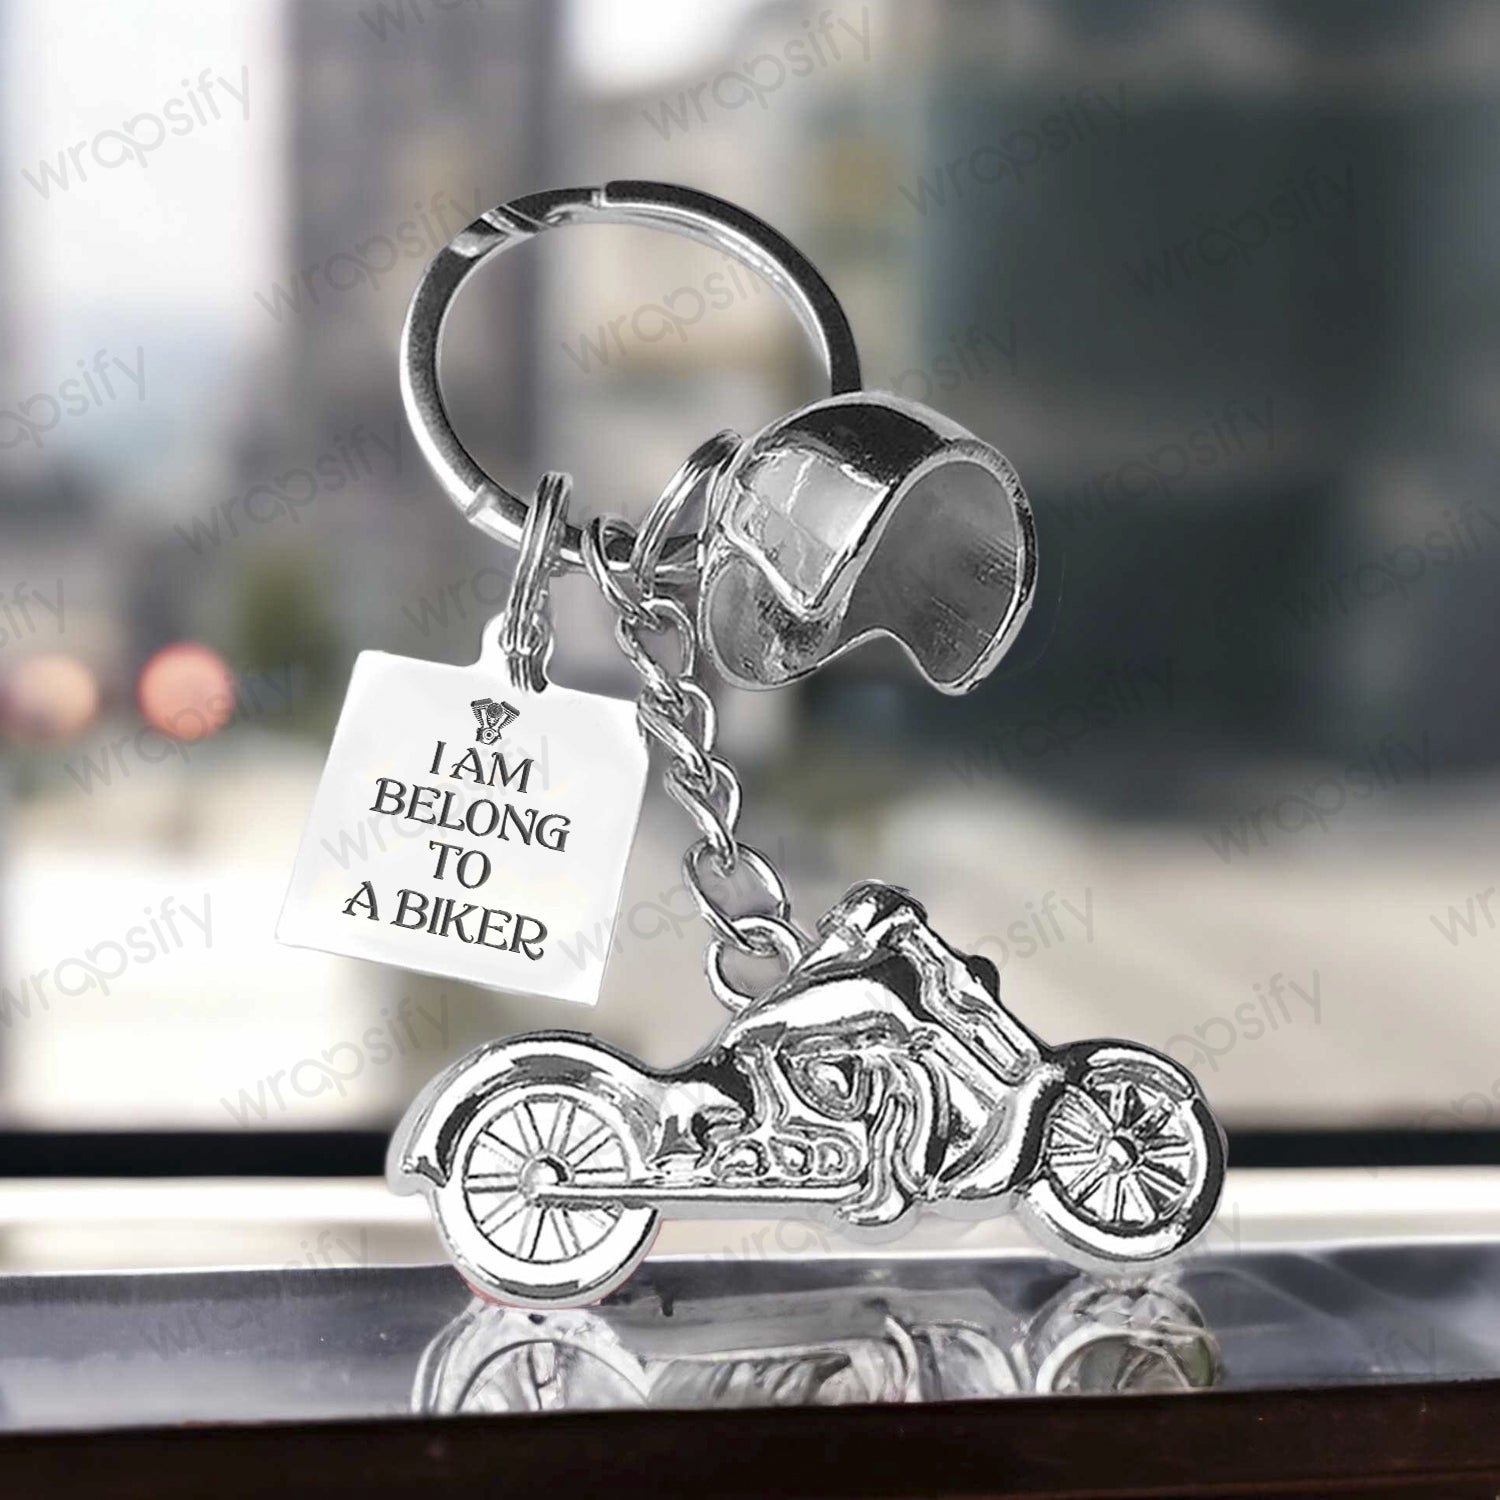 Copy of Classic Bike Keychain - To My Wife - All Of My Lasts To Be With You - Gkt15001